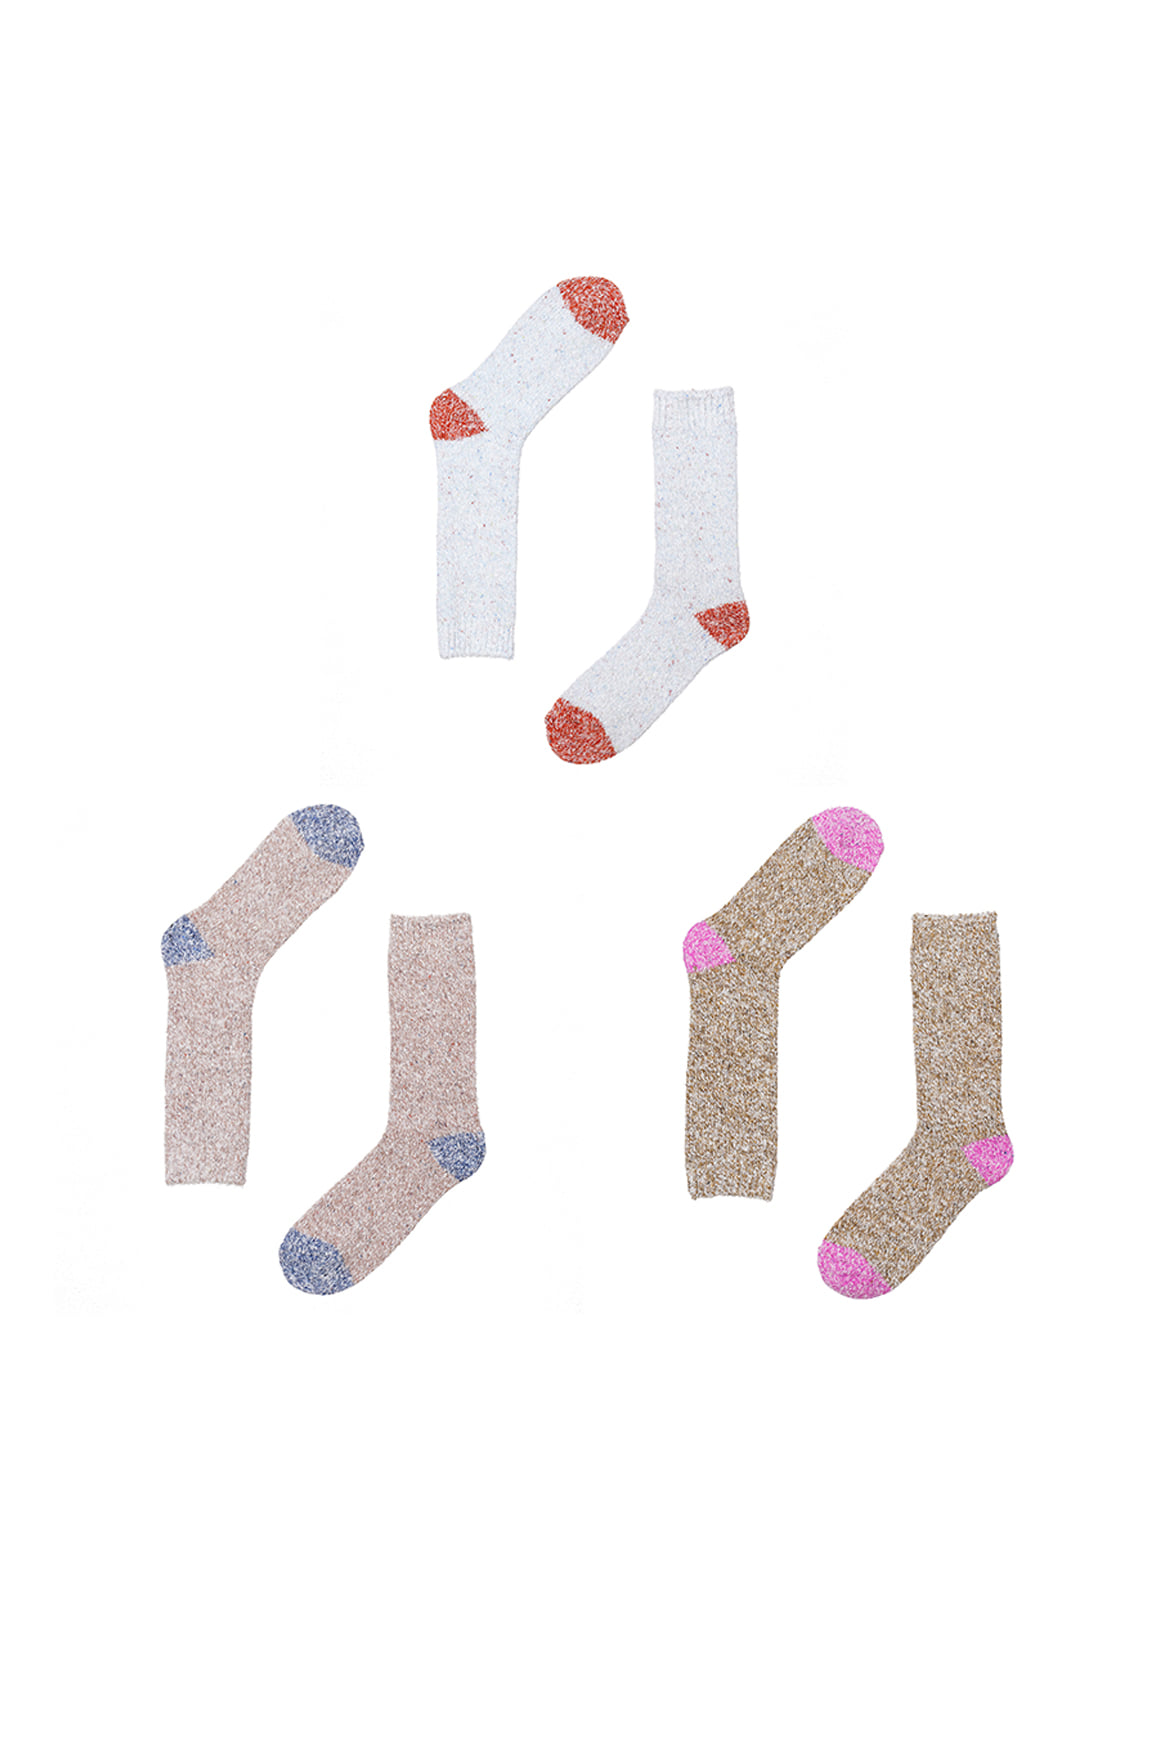 Popping Candy Socks_3 colors